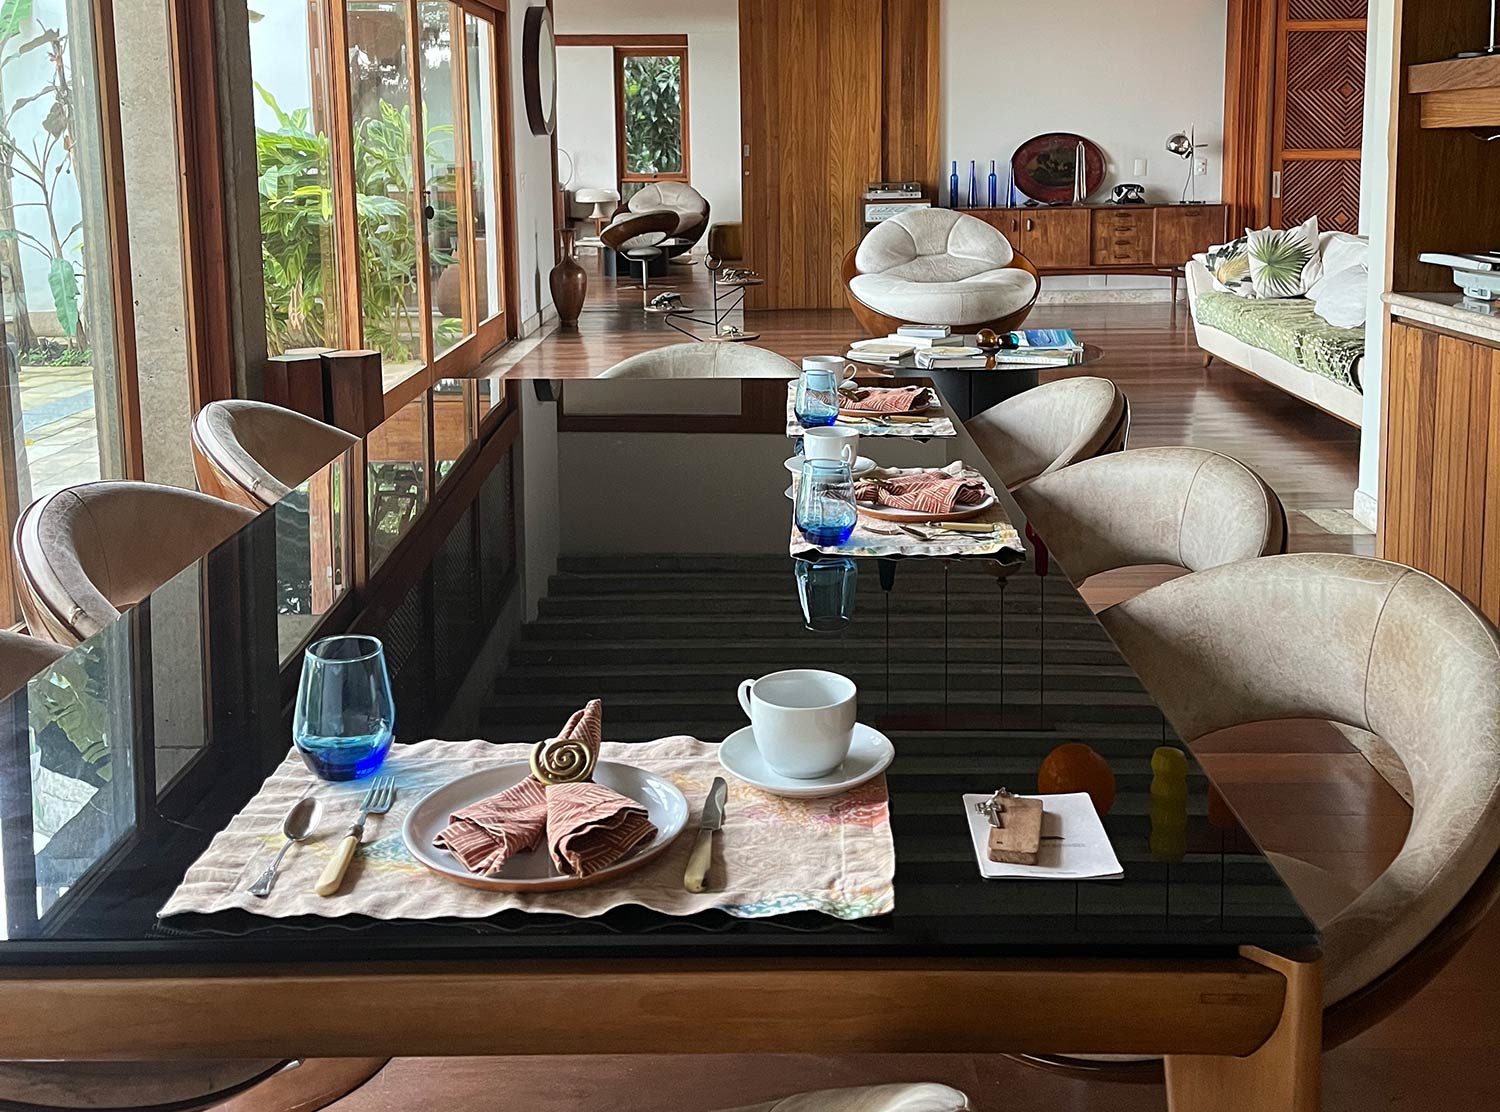 Chez Georges A Brazilian breakfast is served every morning. It's also a great way to socialize with other guests as the breakfast is served for all at the same table